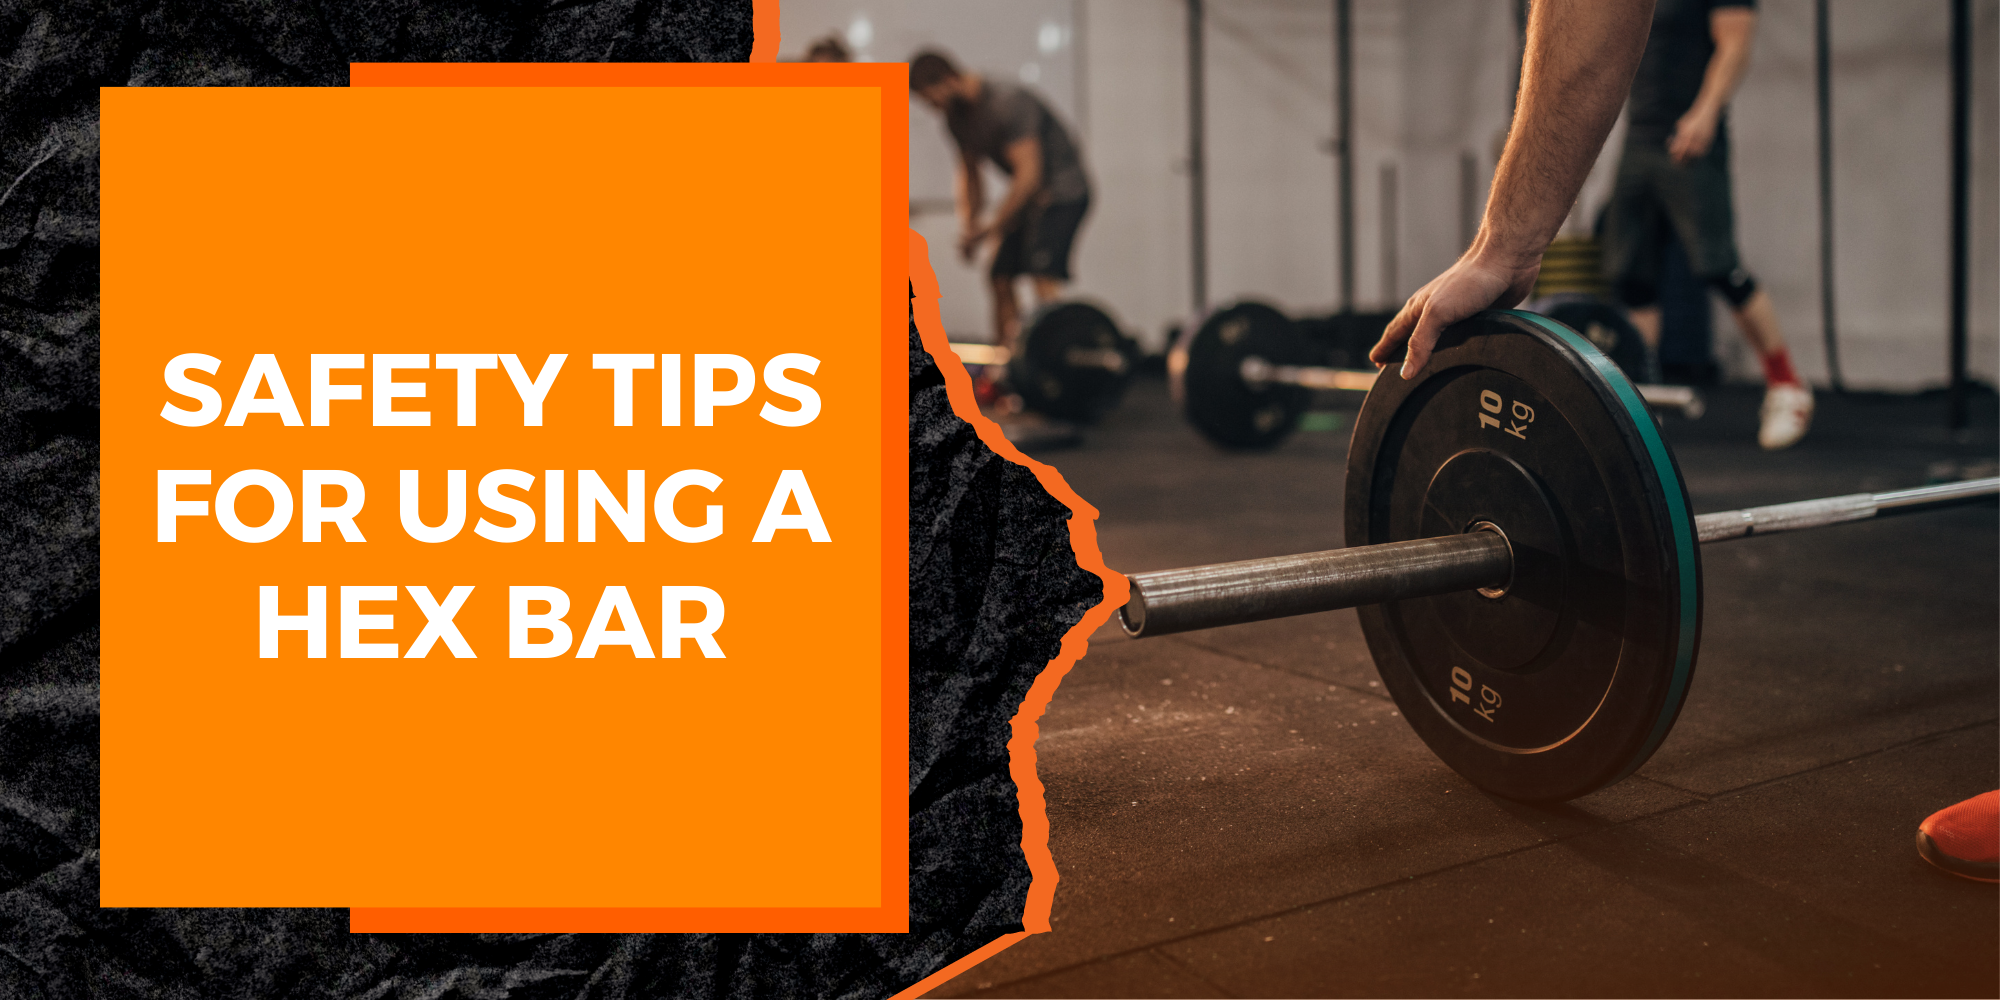 Safety Tips for Using a Hex Bar